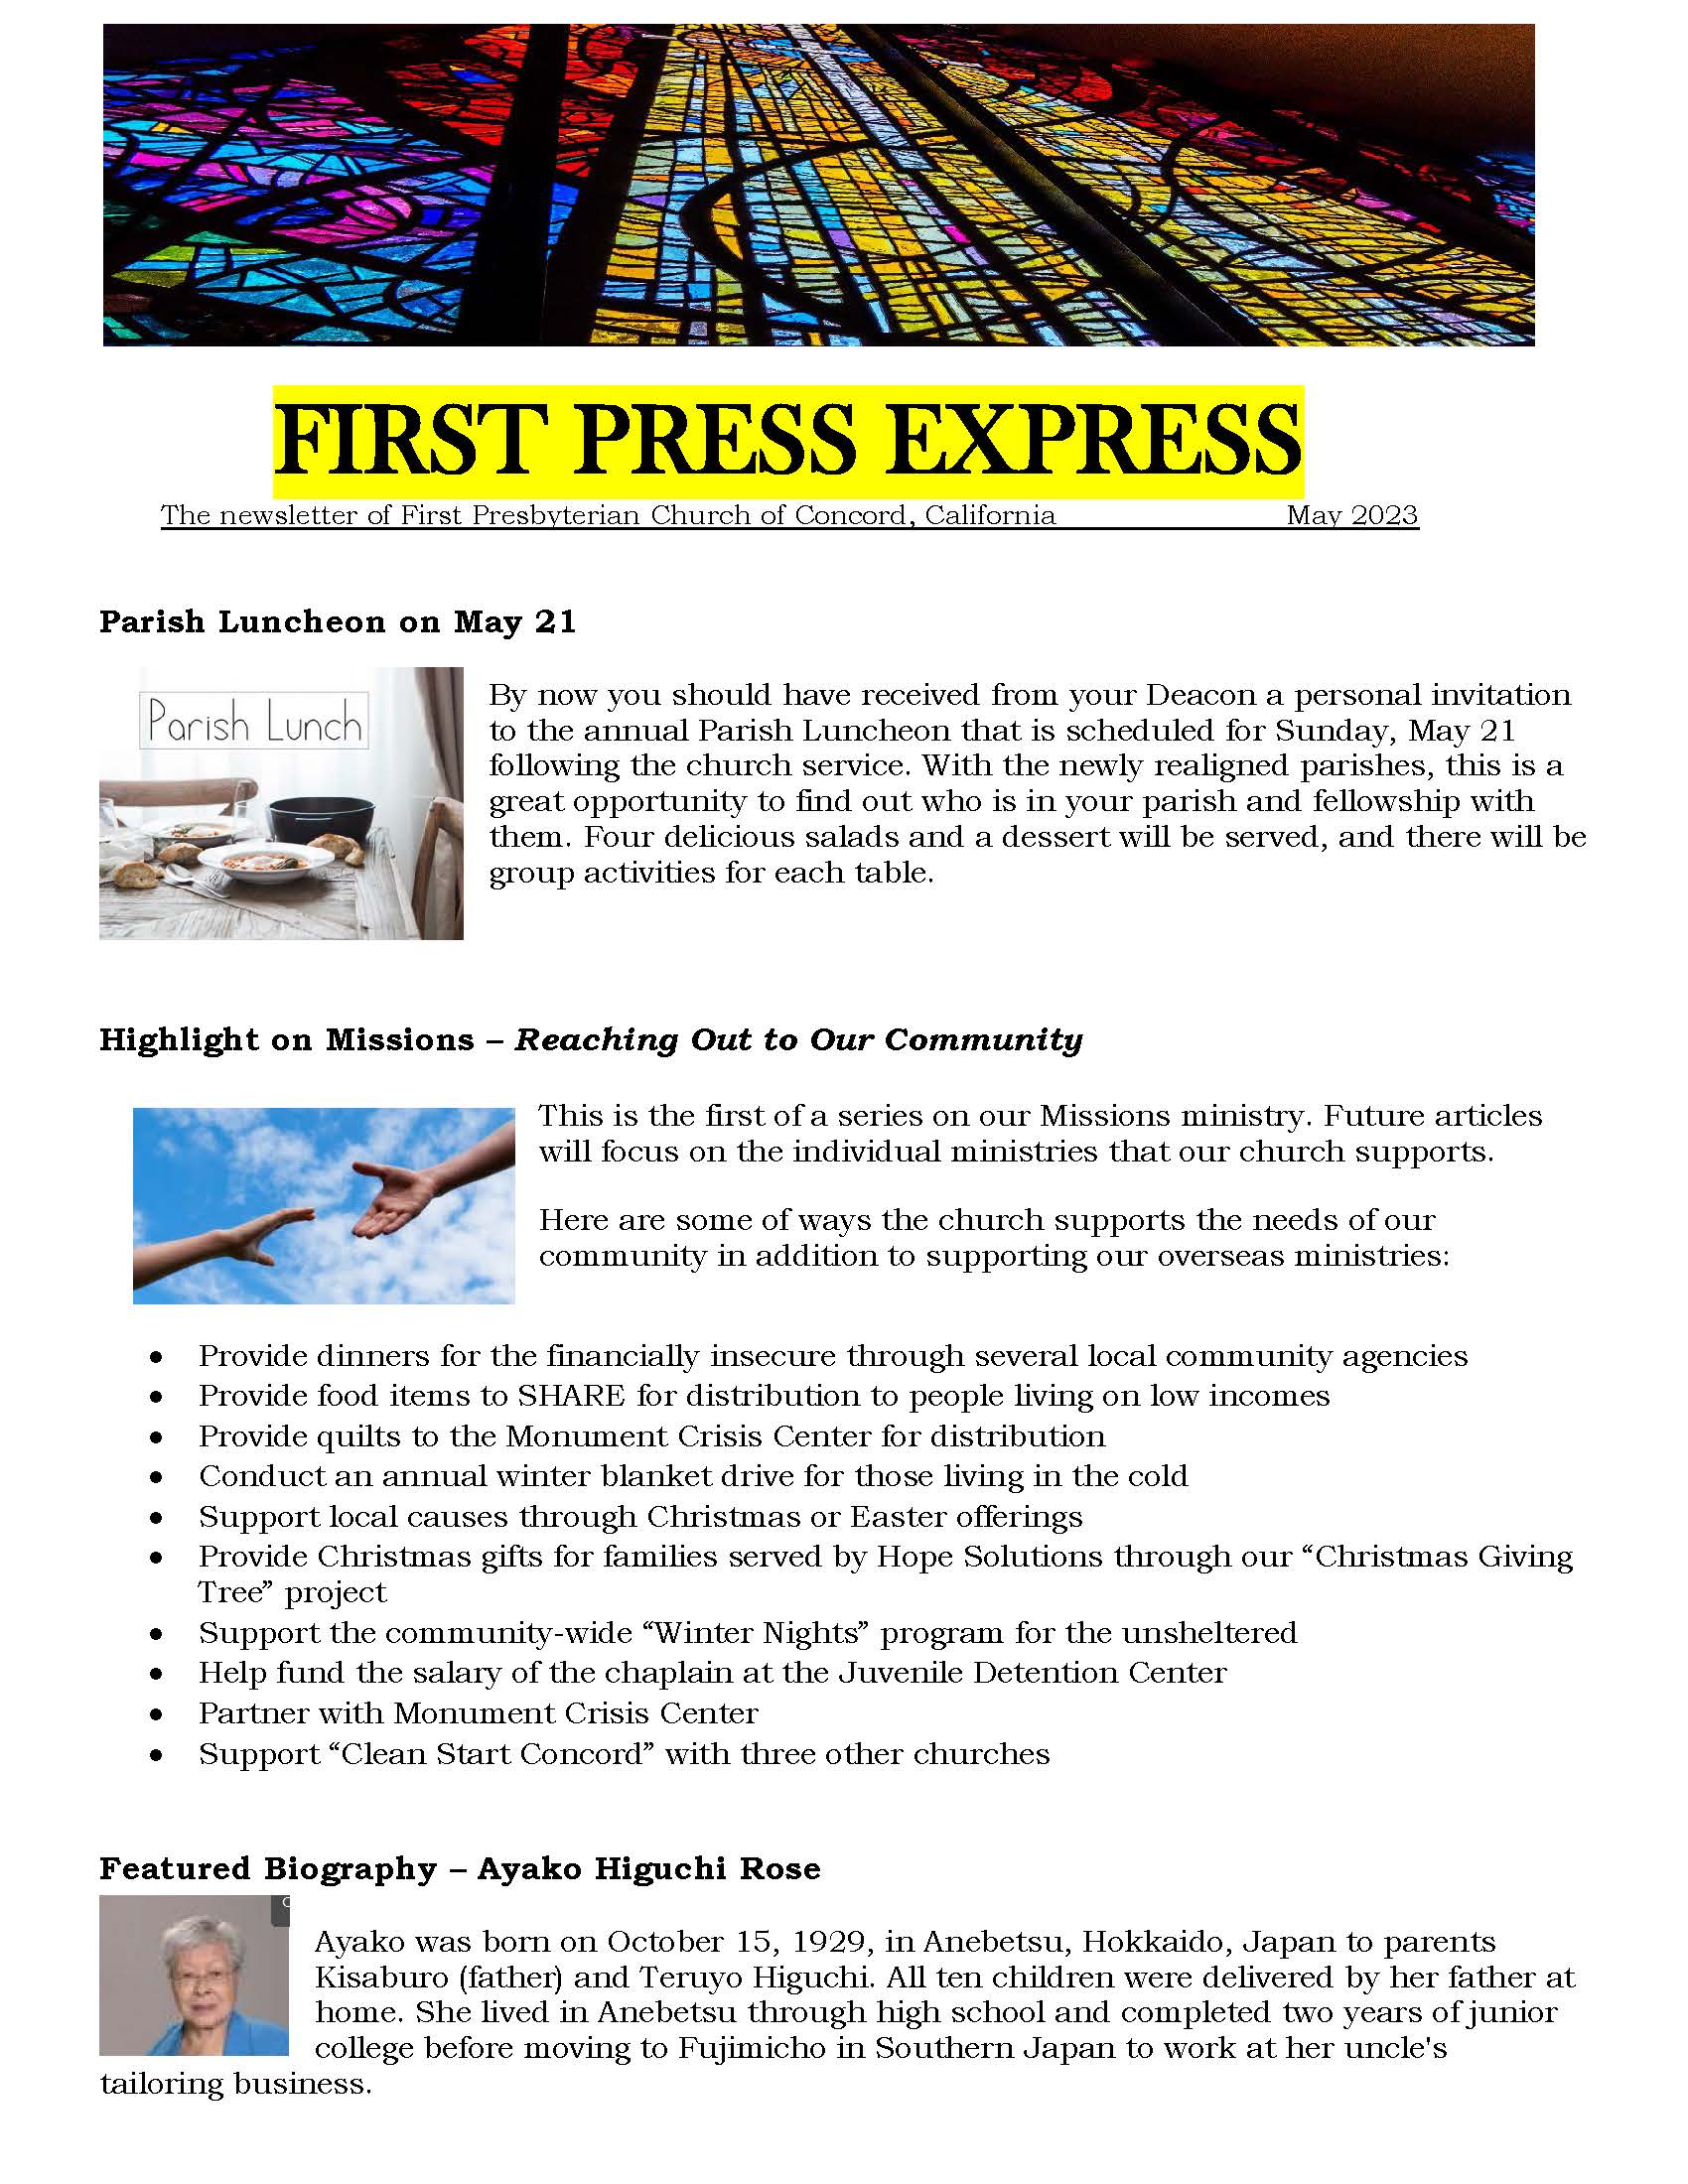 cover of First Press Express May 2023